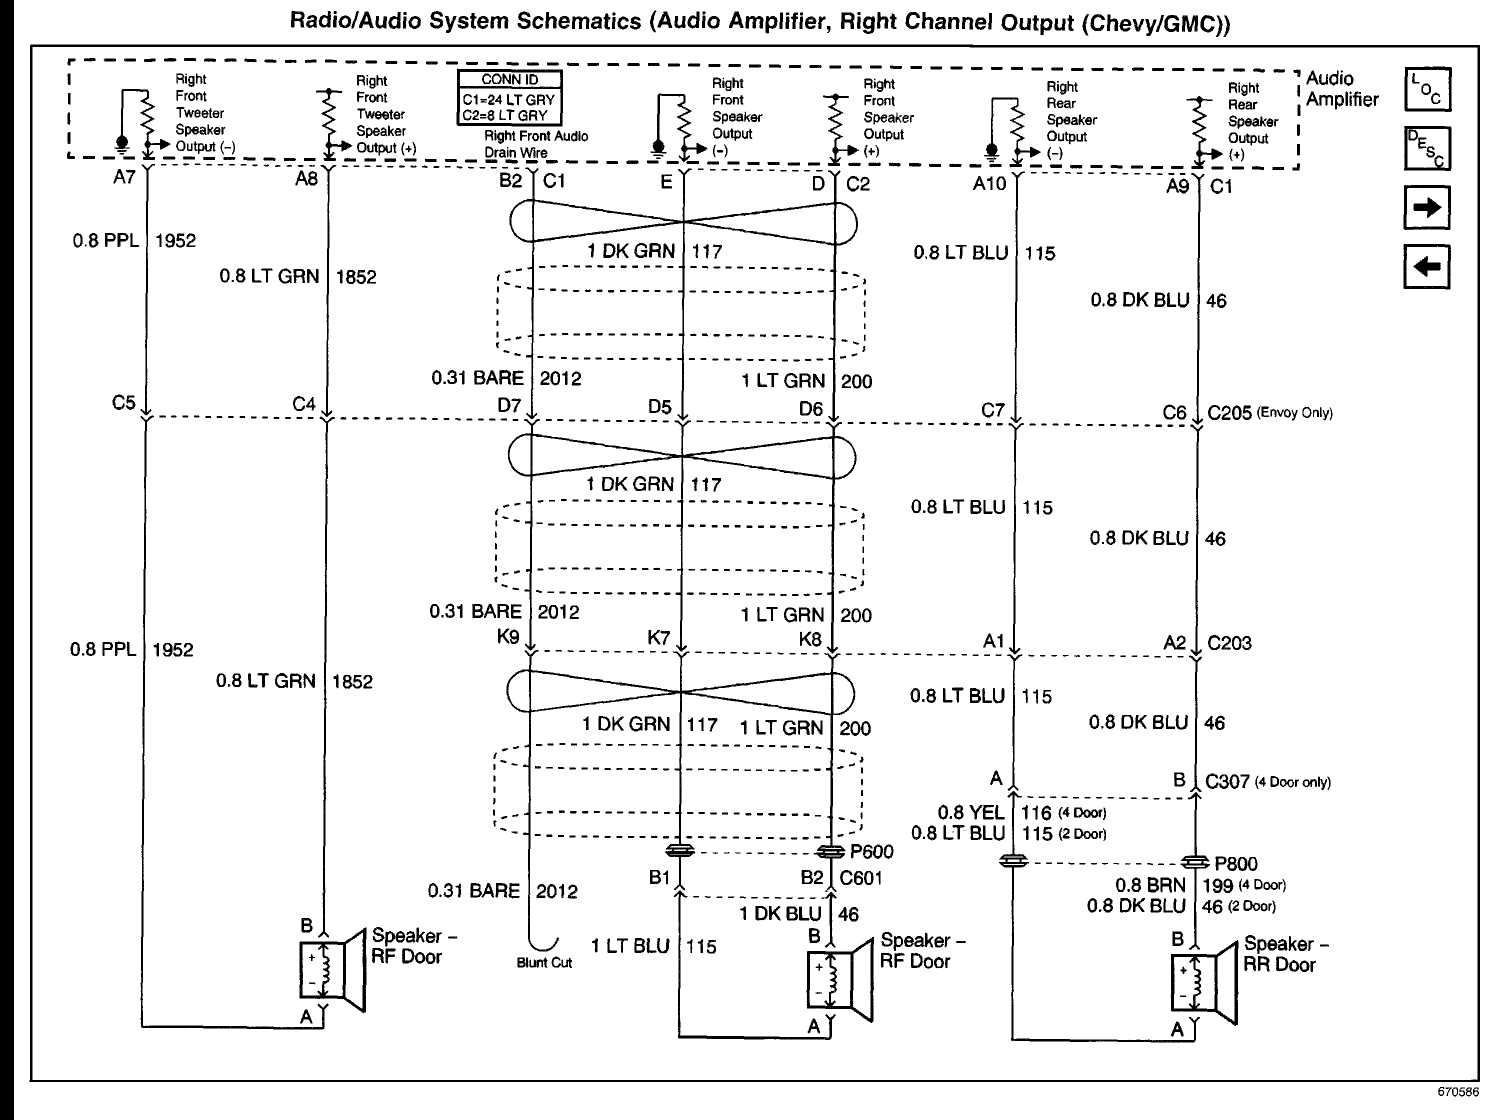 Radio Diagram Needed: I Need a Diagram of the Wires From the Radio...